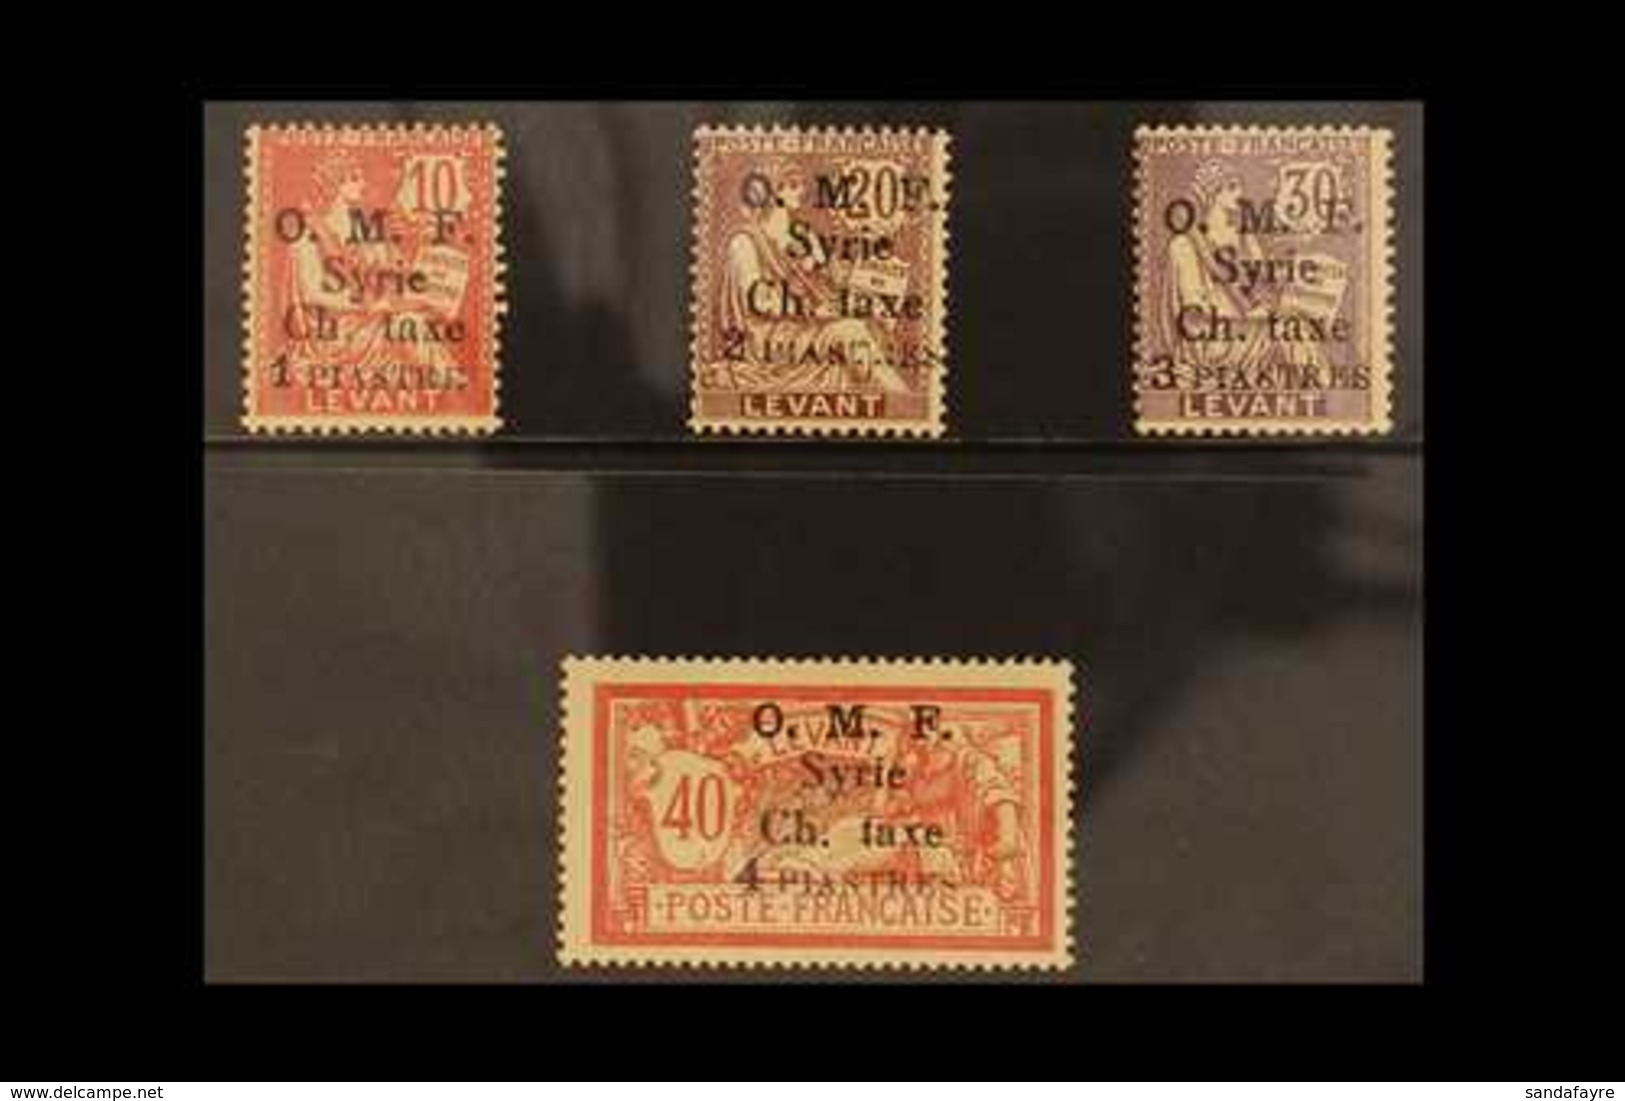 POSTAGE DUES 1920 O.M.F. Ch. Taxe Ovpt On Stamps Of French Offices, SG 48/51, Very Fine Mint. Rare And Elusive Set. (4 S - Syria